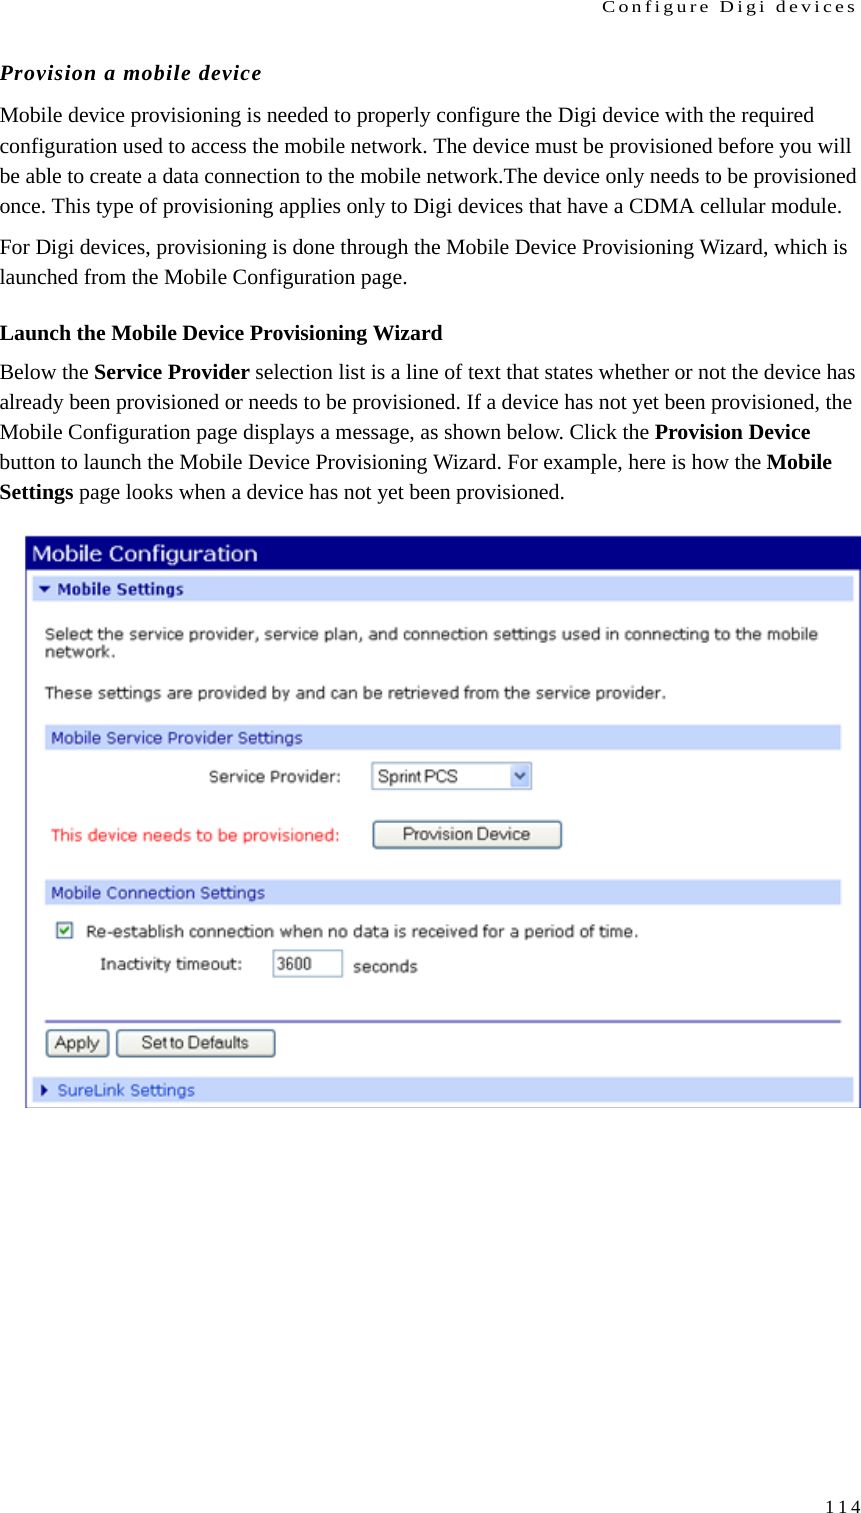 Configure Digi devices114Provision a mobile deviceMobile device provisioning is needed to properly configure the Digi device with the required configuration used to access the mobile network. The device must be provisioned before you will be able to create a data connection to the mobile network.The device only needs to be provisioned once. This type of provisioning applies only to Digi devices that have a CDMA cellular module.For Digi devices, provisioning is done through the Mobile Device Provisioning Wizard, which is launched from the Mobile Configuration page. Launch the Mobile Device Provisioning WizardBelow the Service Provider selection list is a line of text that states whether or not the device has already been provisioned or needs to be provisioned. If a device has not yet been provisioned, the Mobile Configuration page displays a message, as shown below. Click the Provision Device button to launch the Mobile Device Provisioning Wizard. For example, here is how the Mobile Settings page looks when a device has not yet been provisioned.